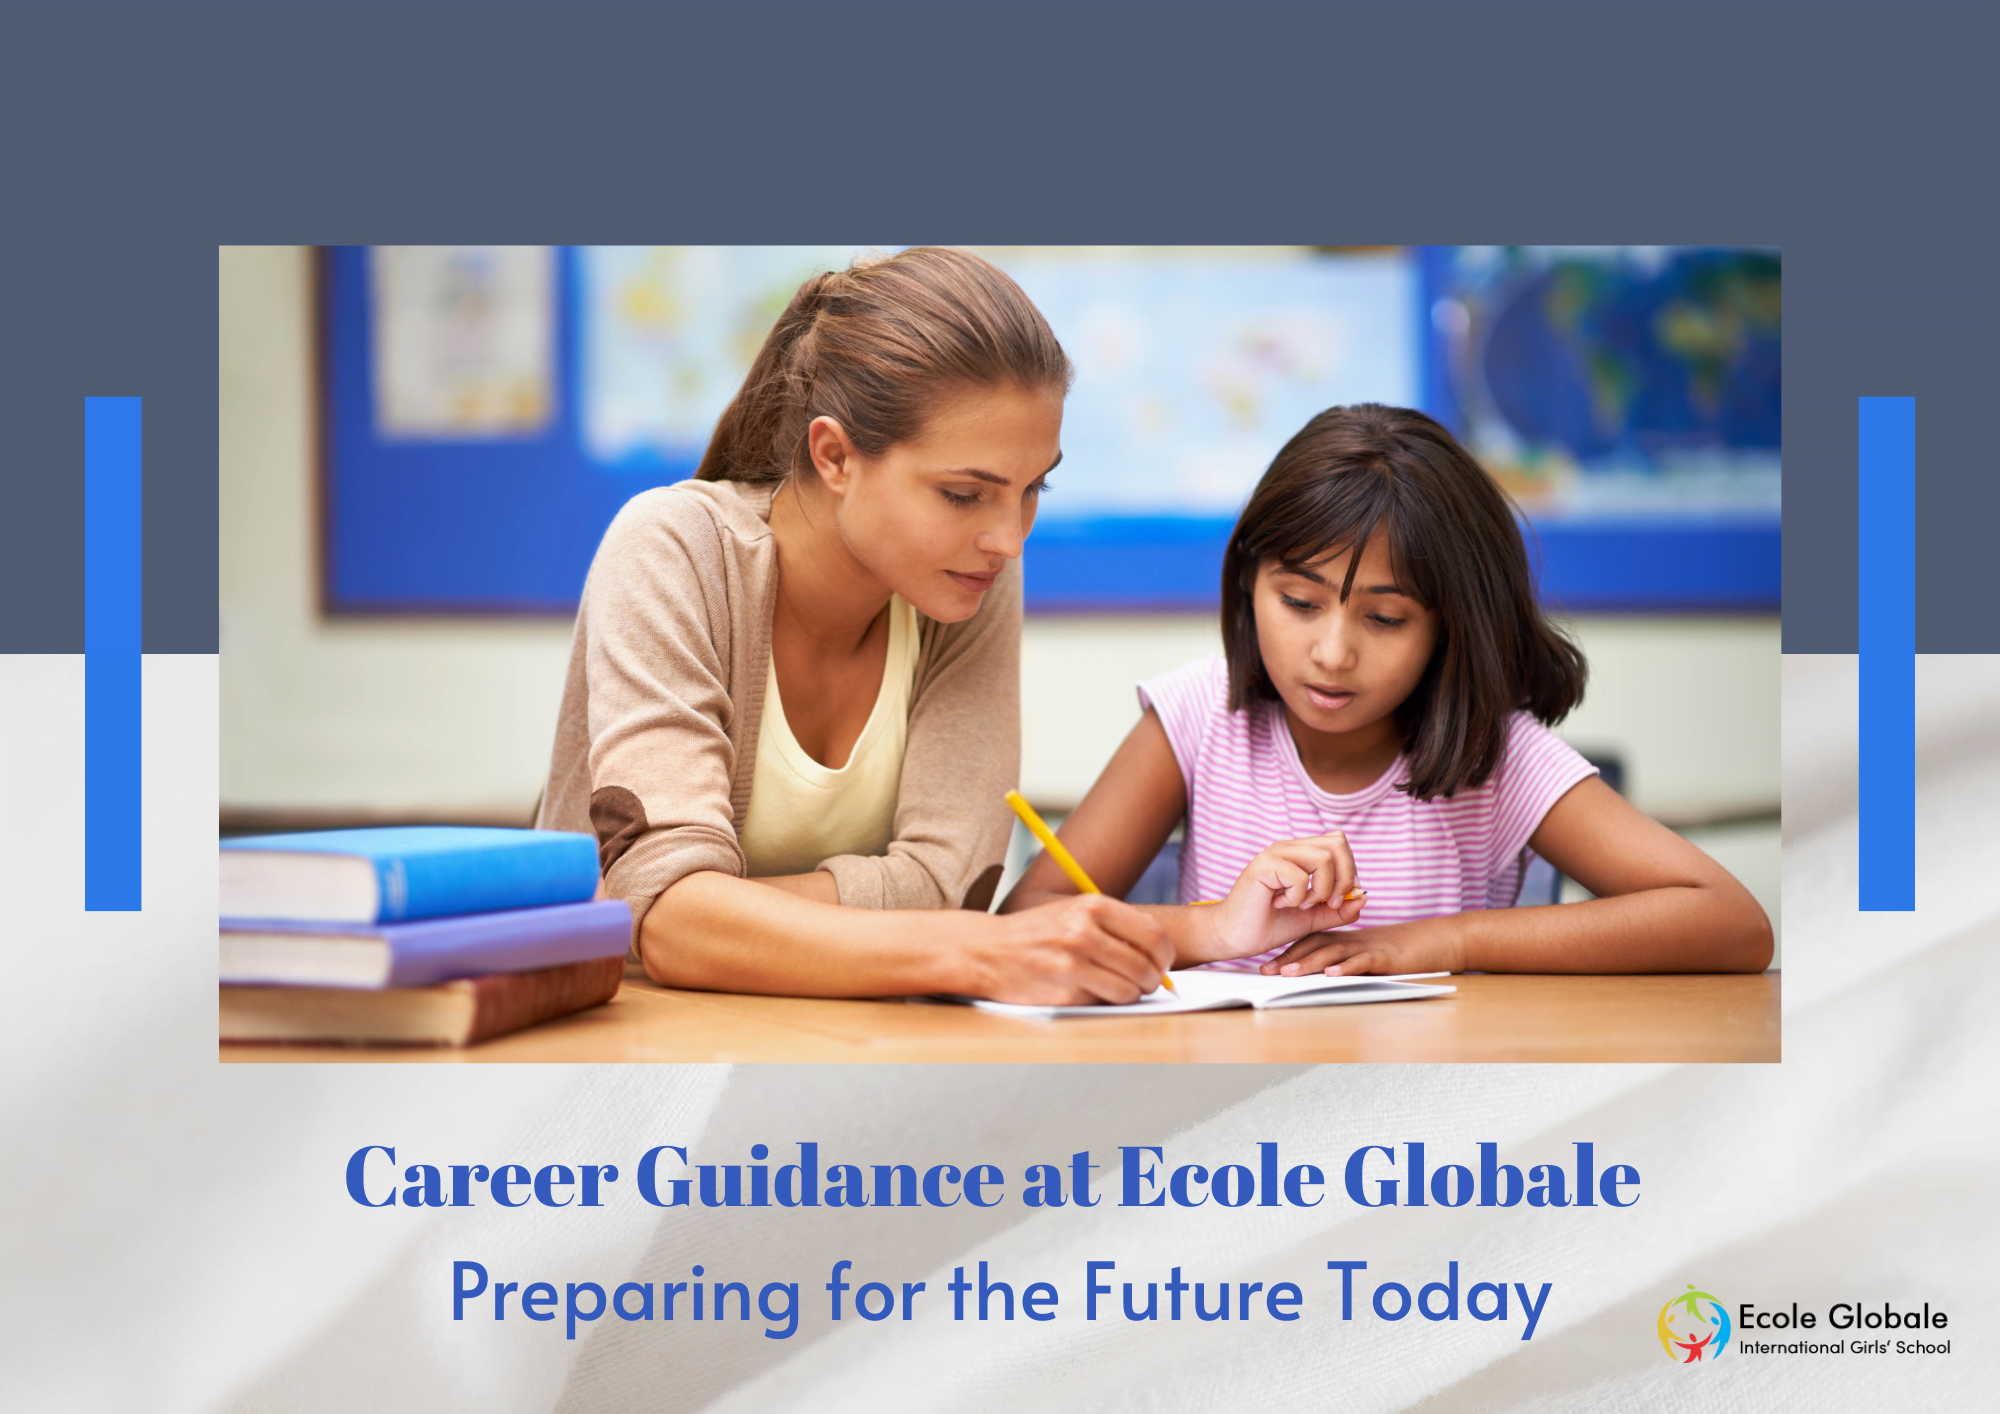 You are currently viewing Career Guidance at Ecole Globale: Preparing for the Future Today